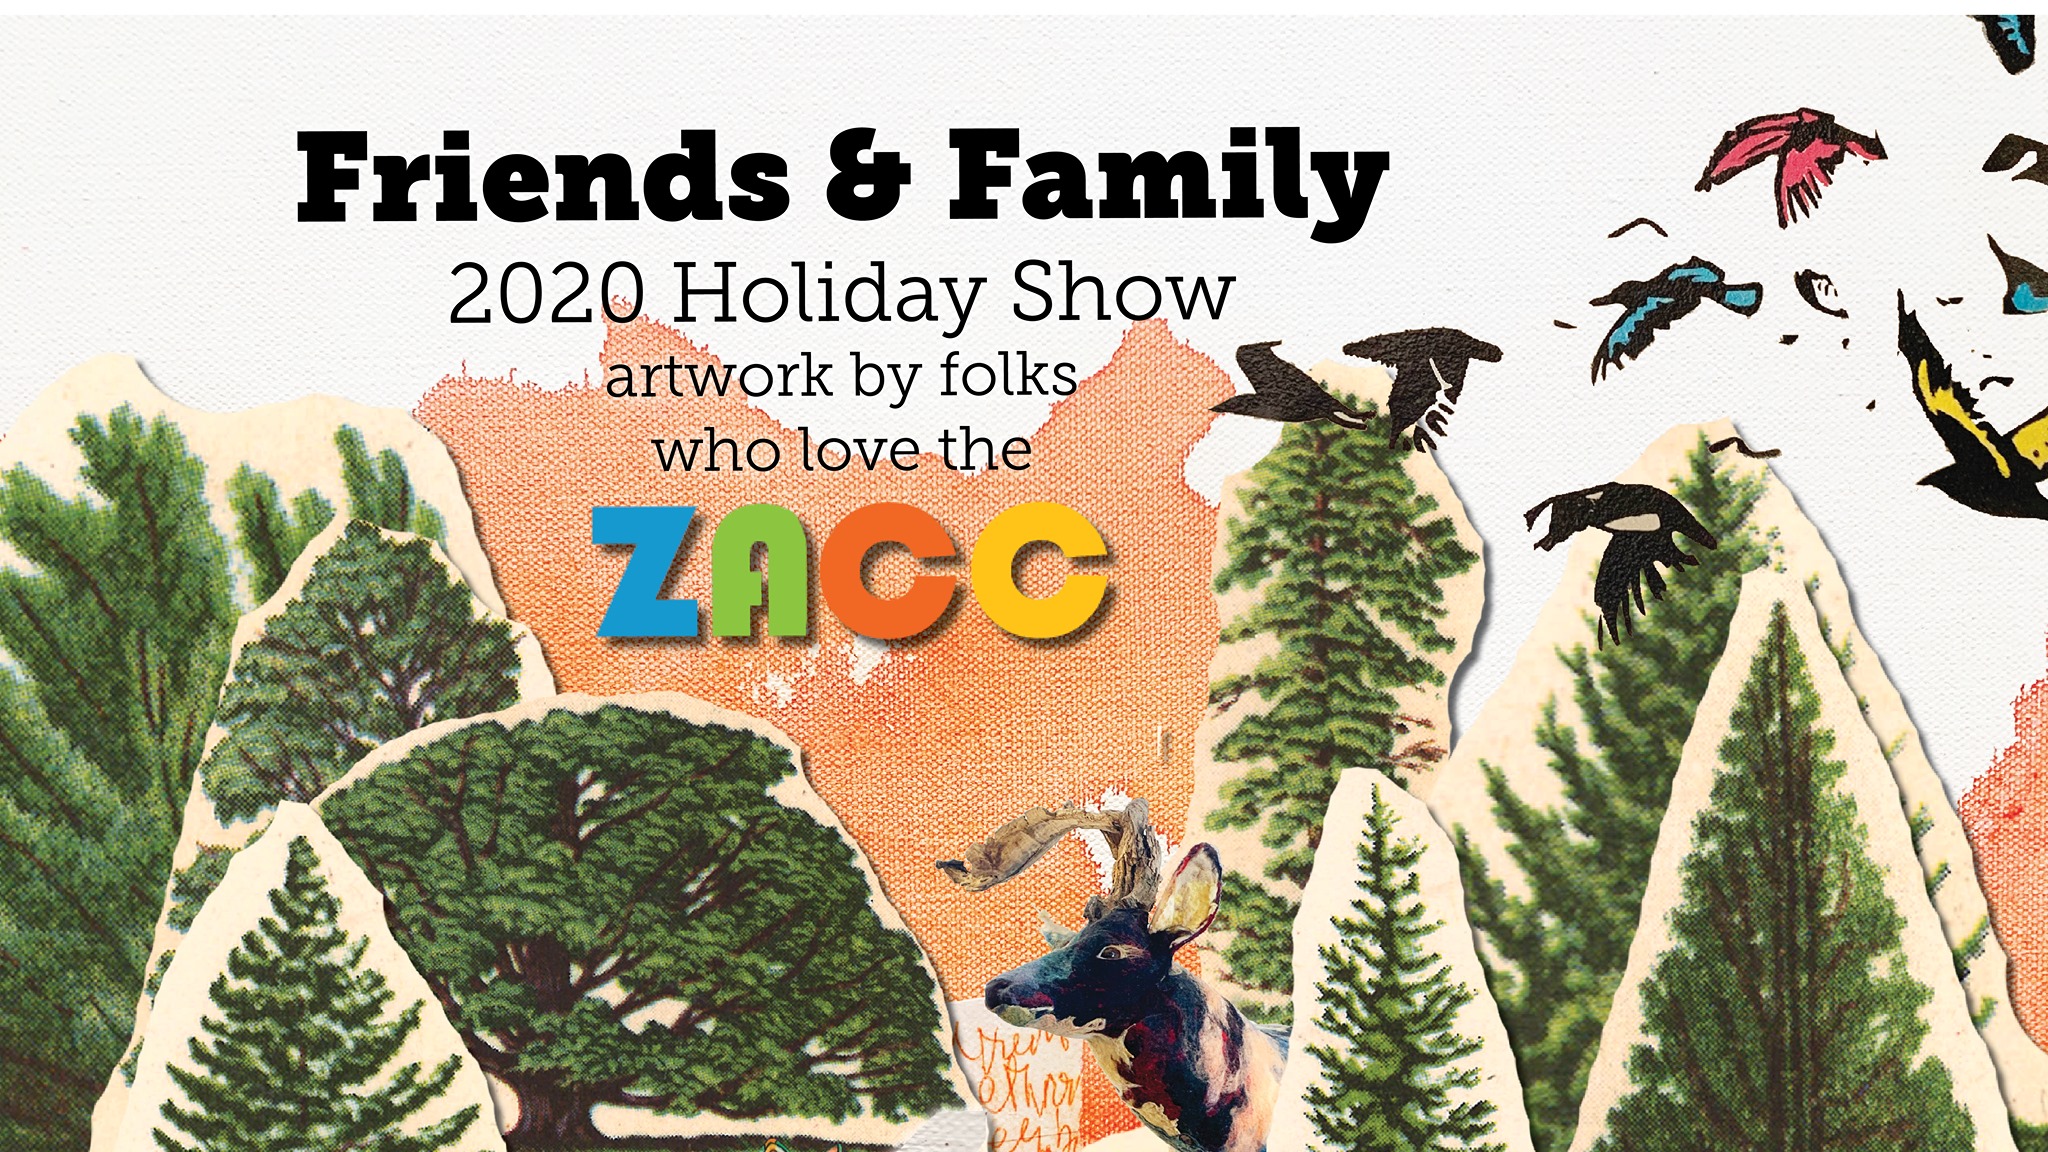 ZACC Friends & Family Holiday Show